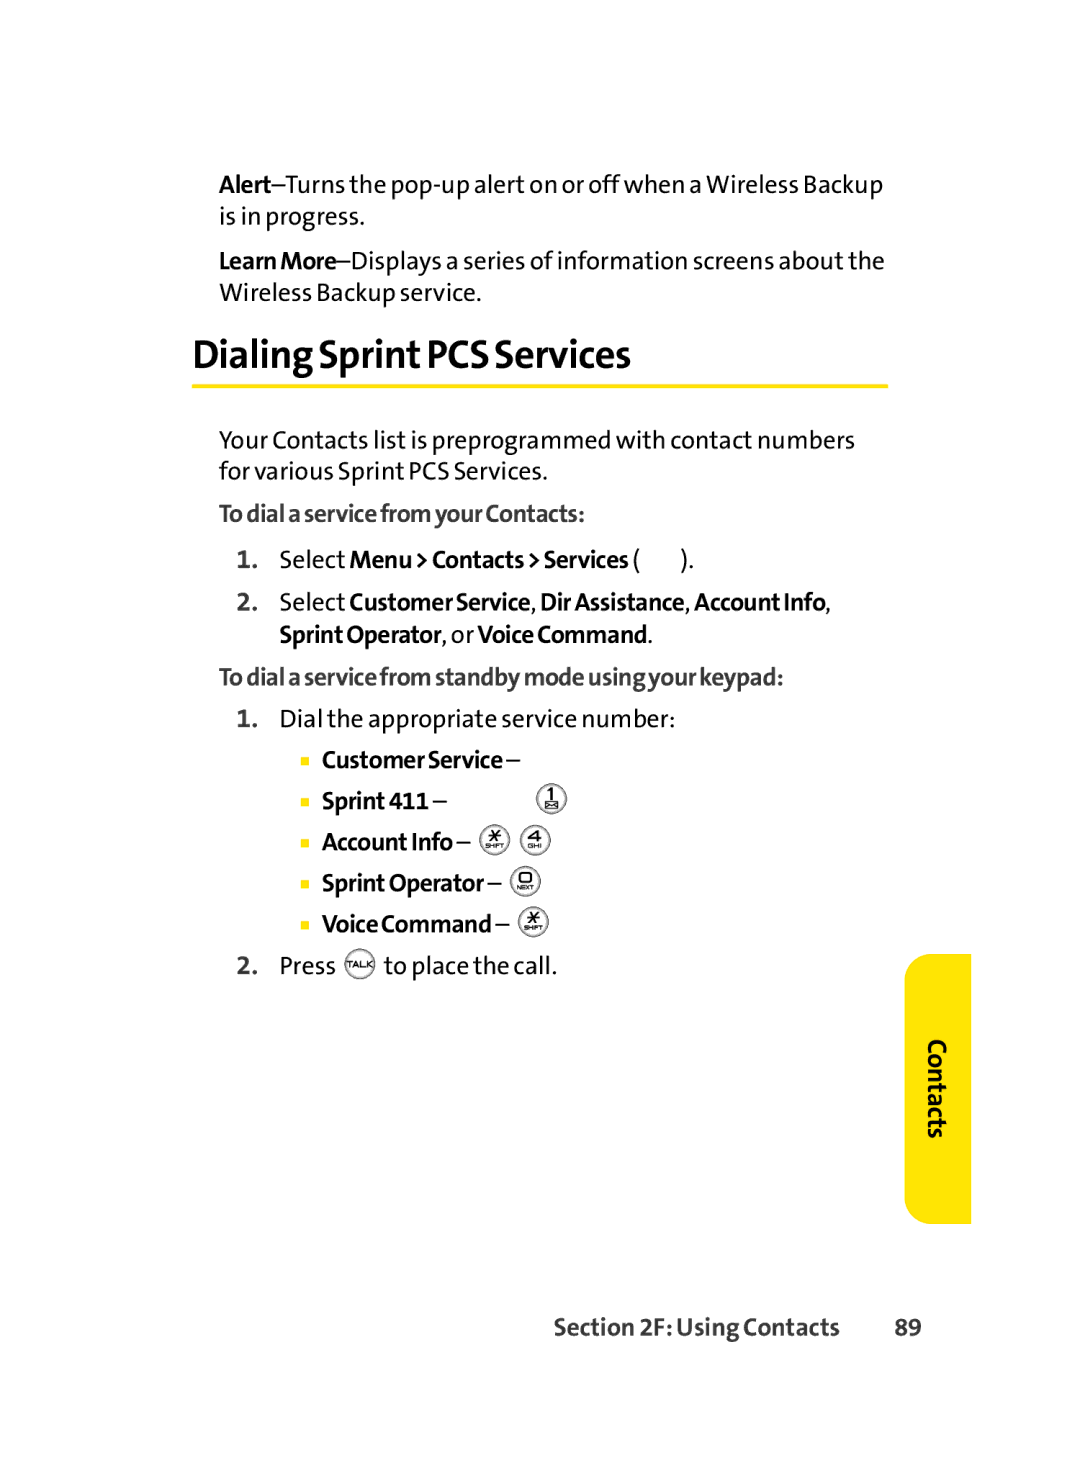 Sprint Nextel LX350 manual Dialing SprintPCS Services, TodialaservicefromyourContacts, Select MenuContactsServices 